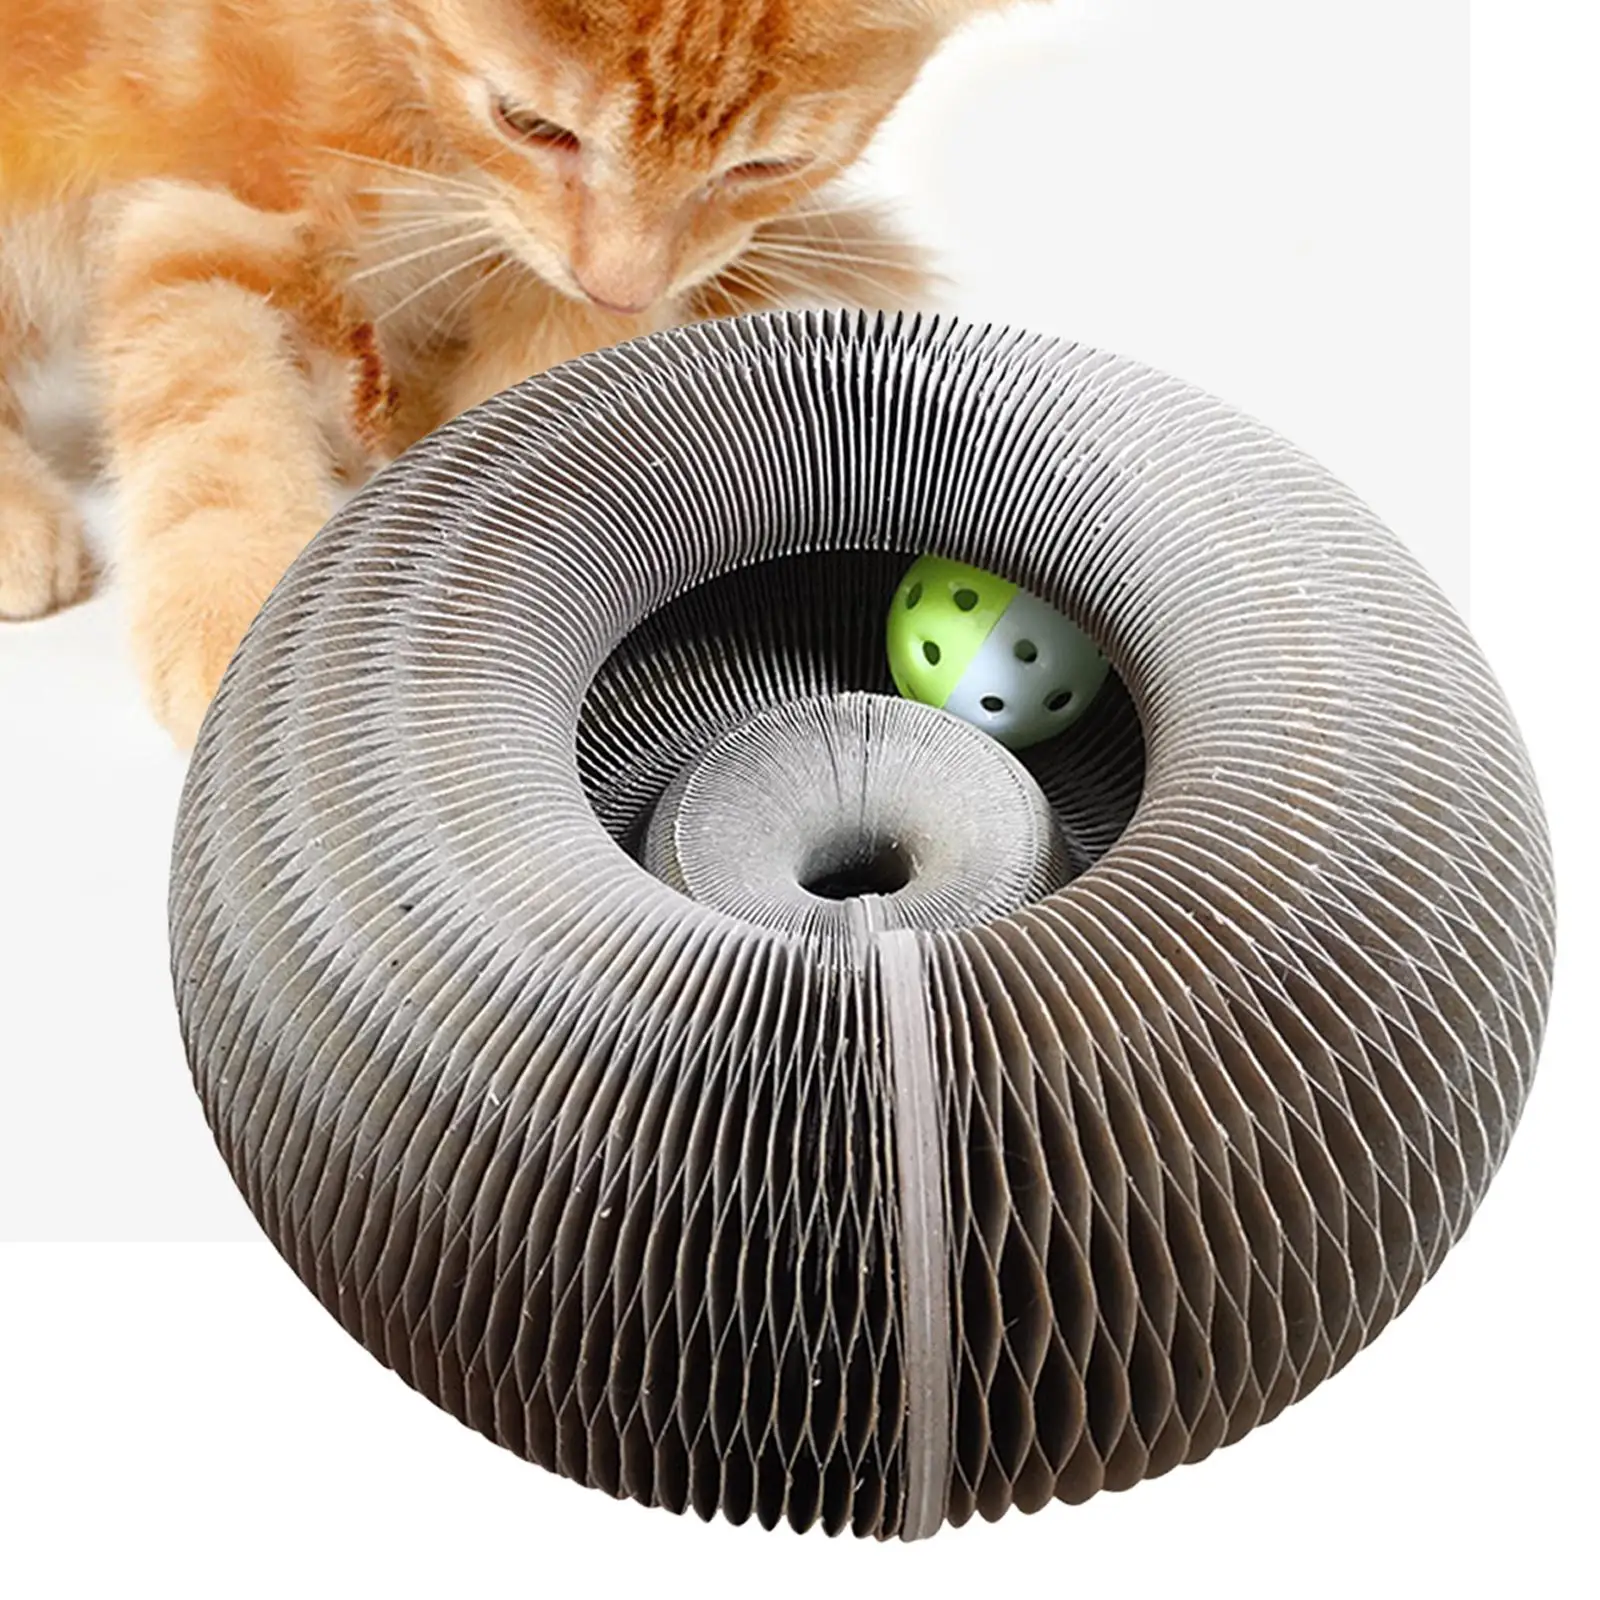 

2in1 Cat Cardboard Corrugated Scratcher Grinding Paws Recyclable with A Toy Bell Ball Organ Cat Scratching Board for Furniture